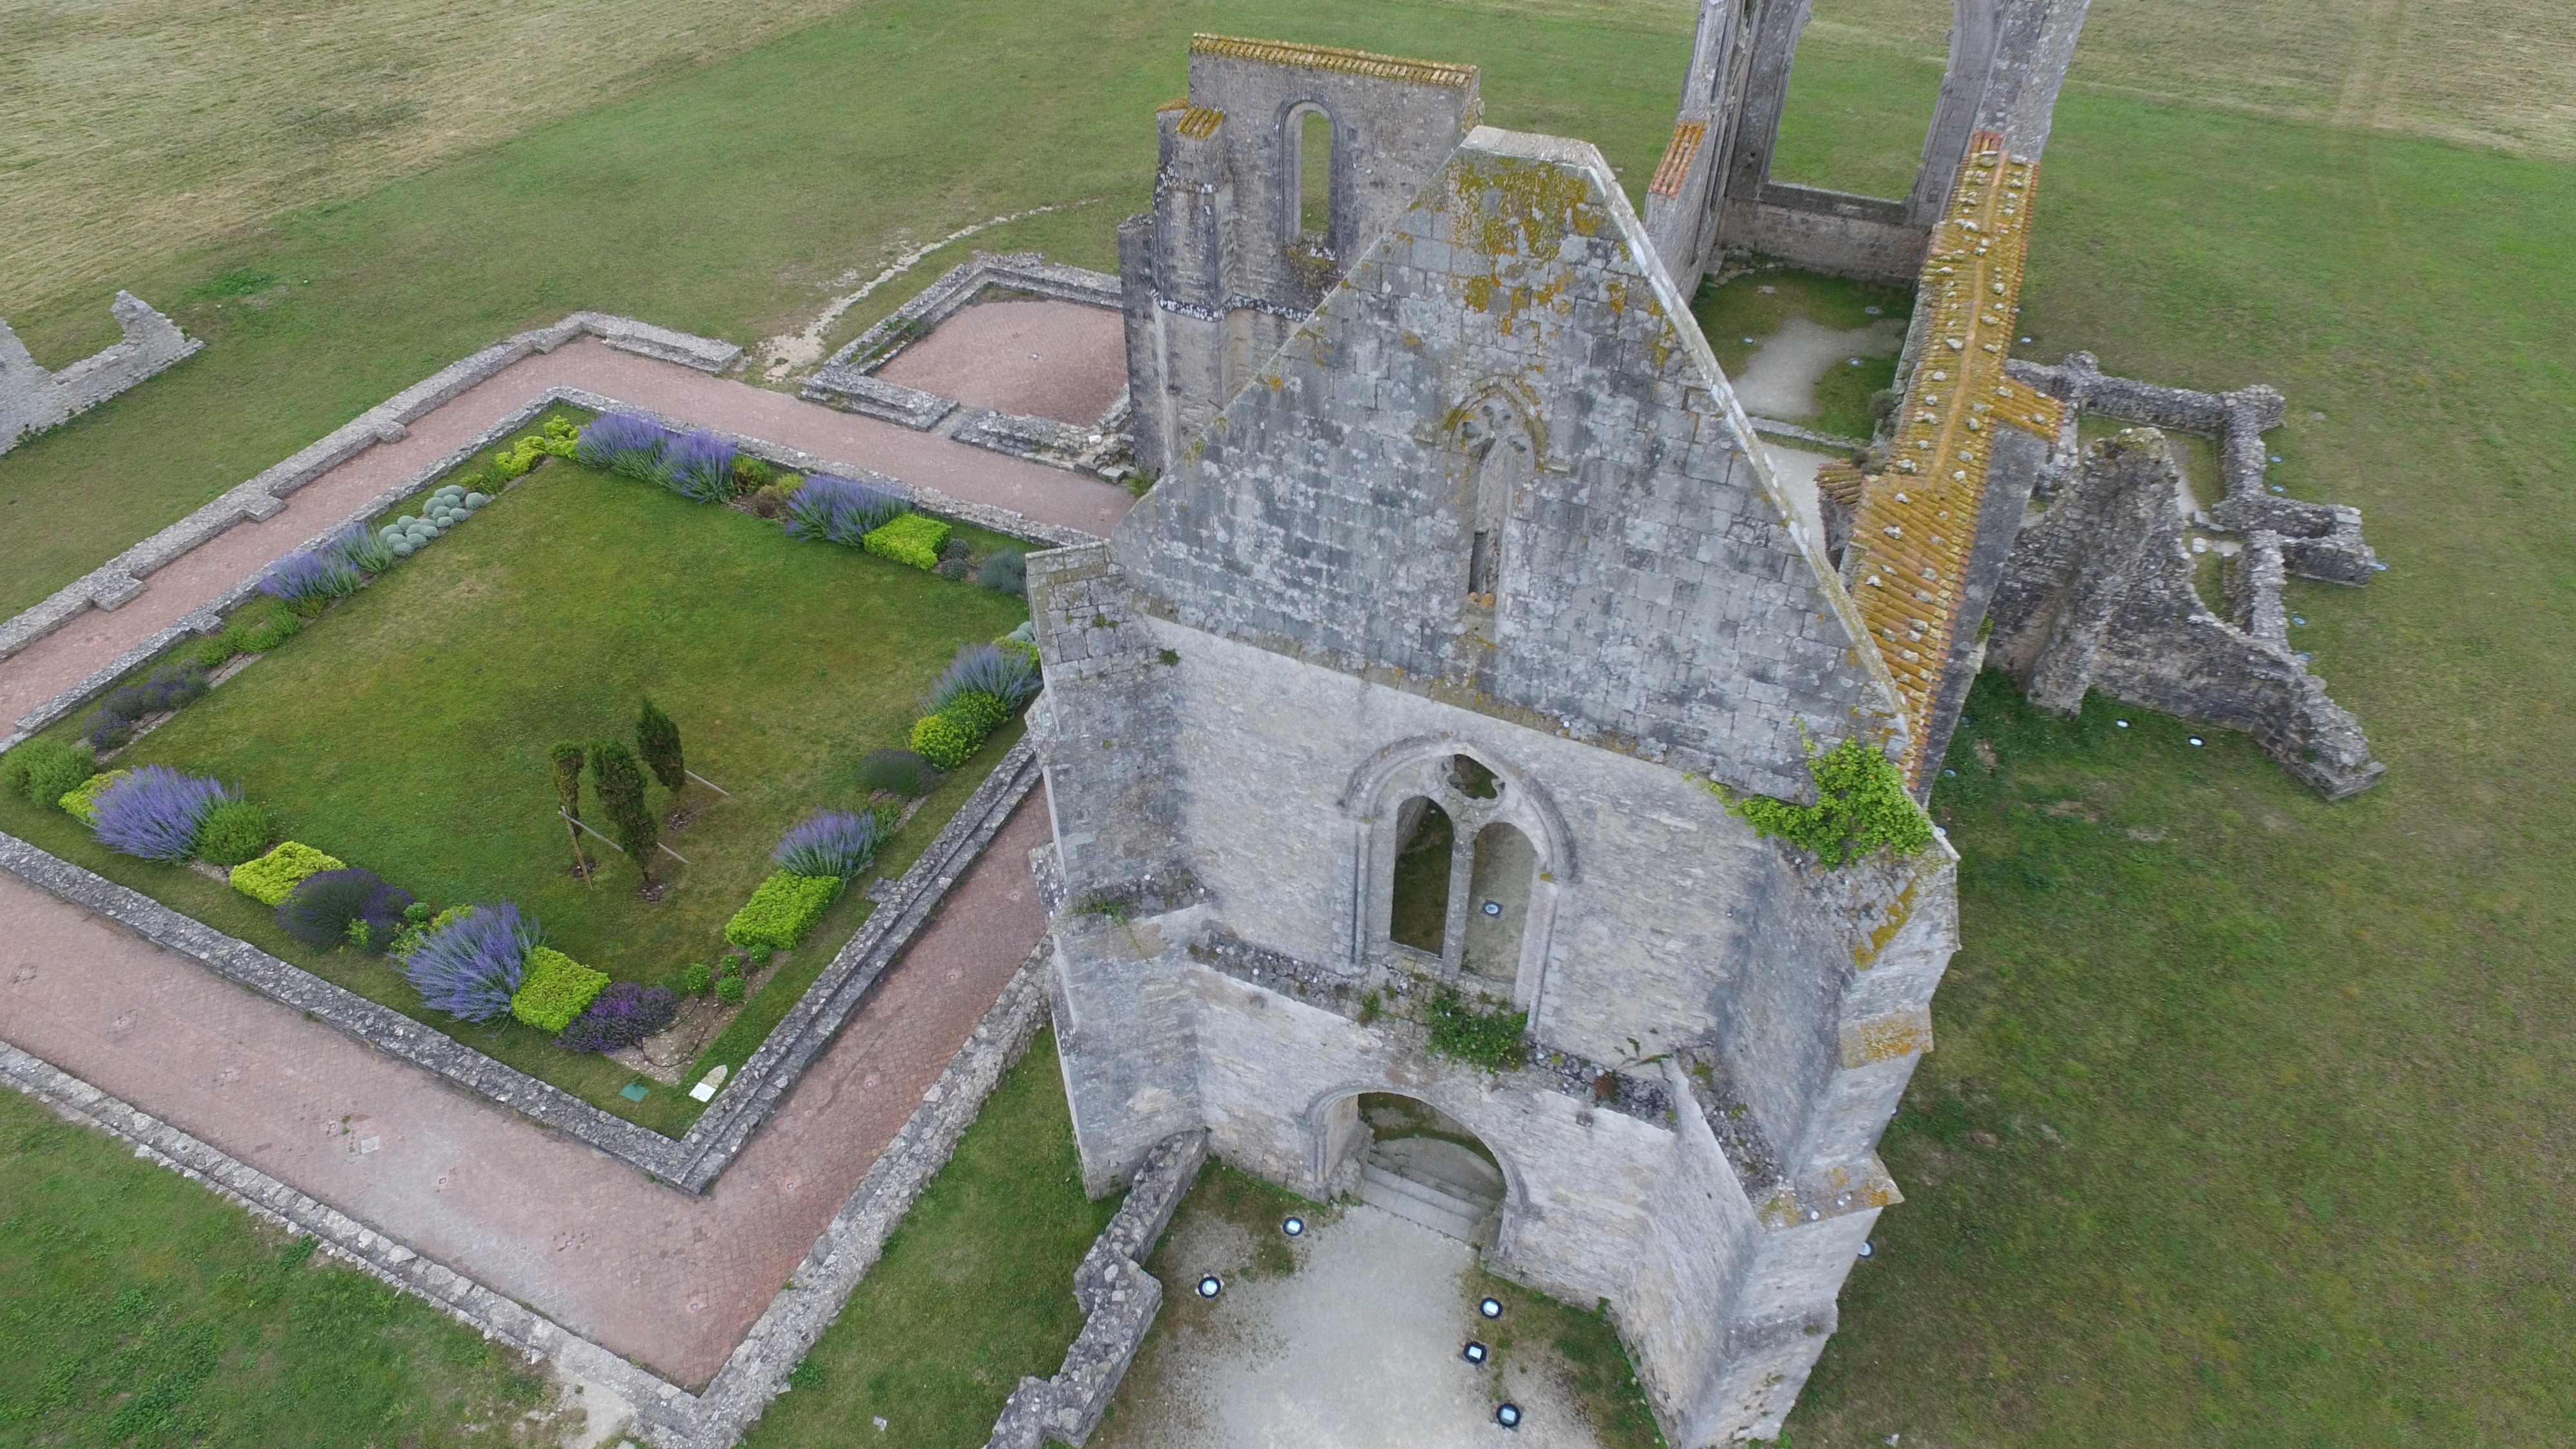 An aerial view of the ruins of the Abbey of Chatelier